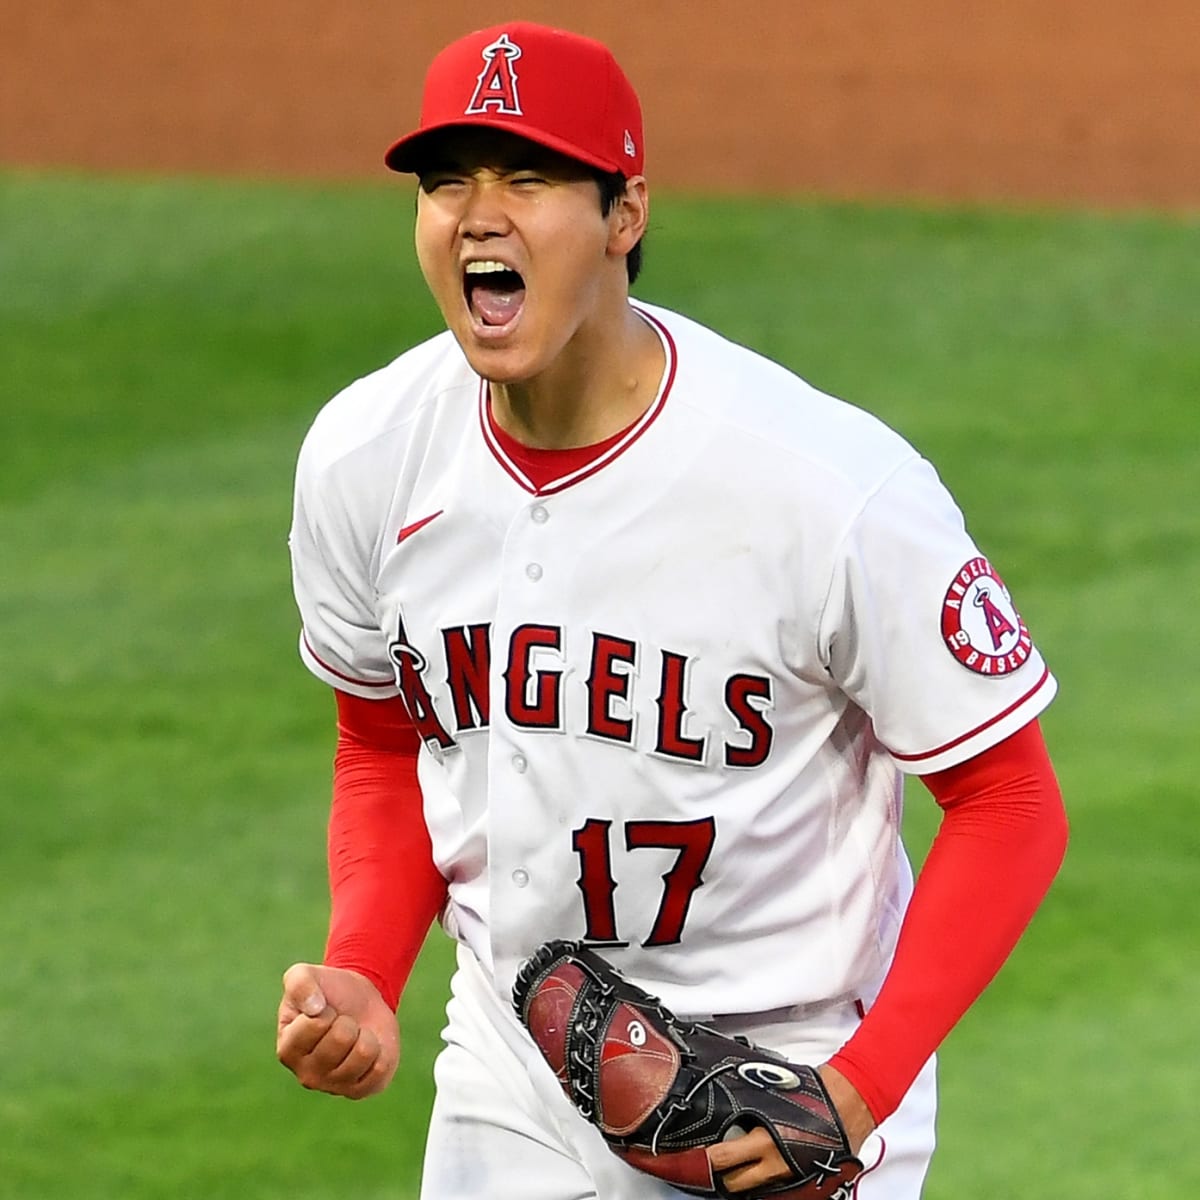 Let's decide which Angels player chose the best nickname for their